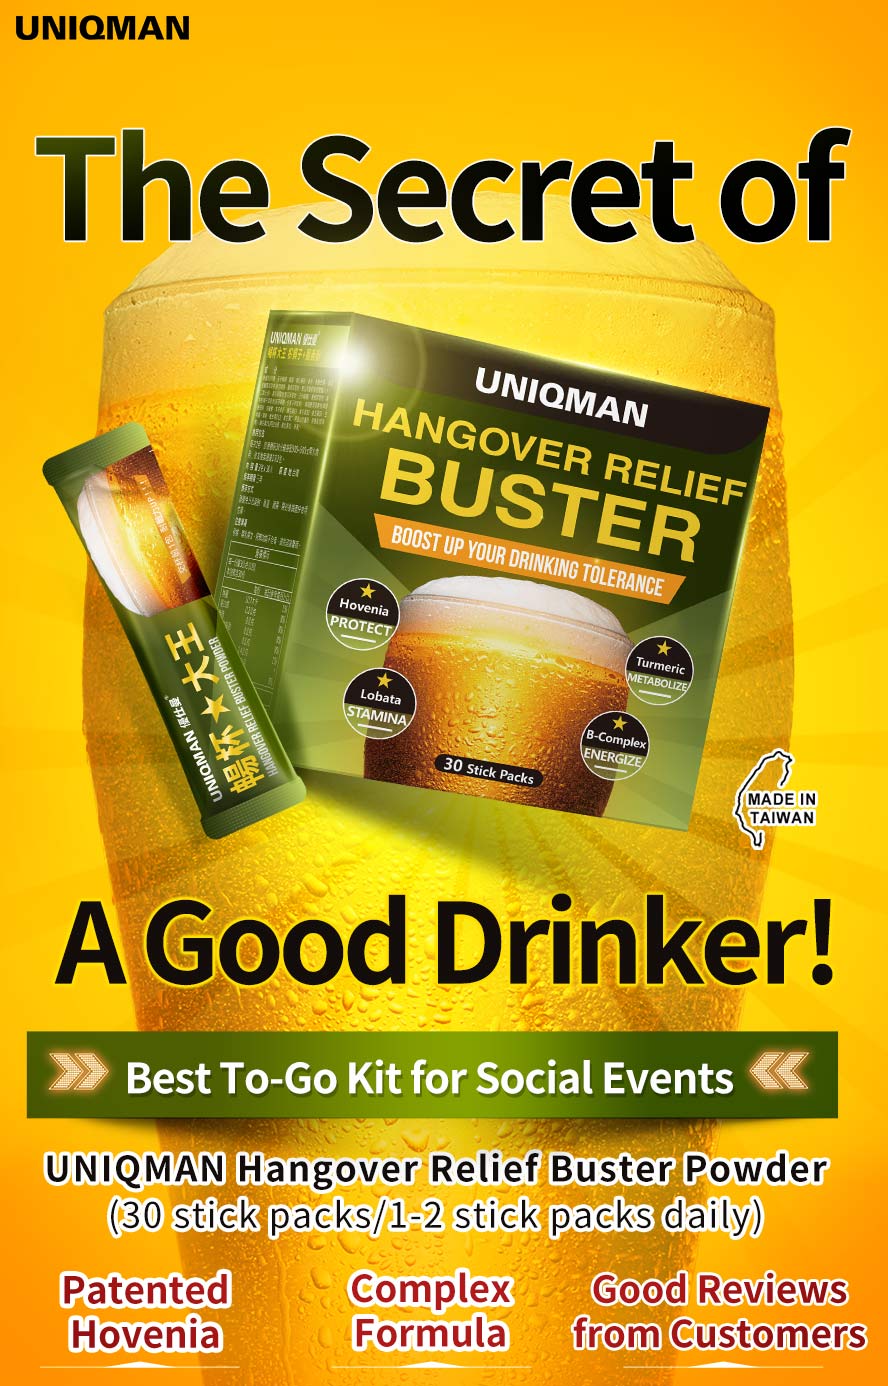 UNIQMAN Hangover Relief Buster the best to-go kit for social events to prevent hangover and enhance drinking tolerance